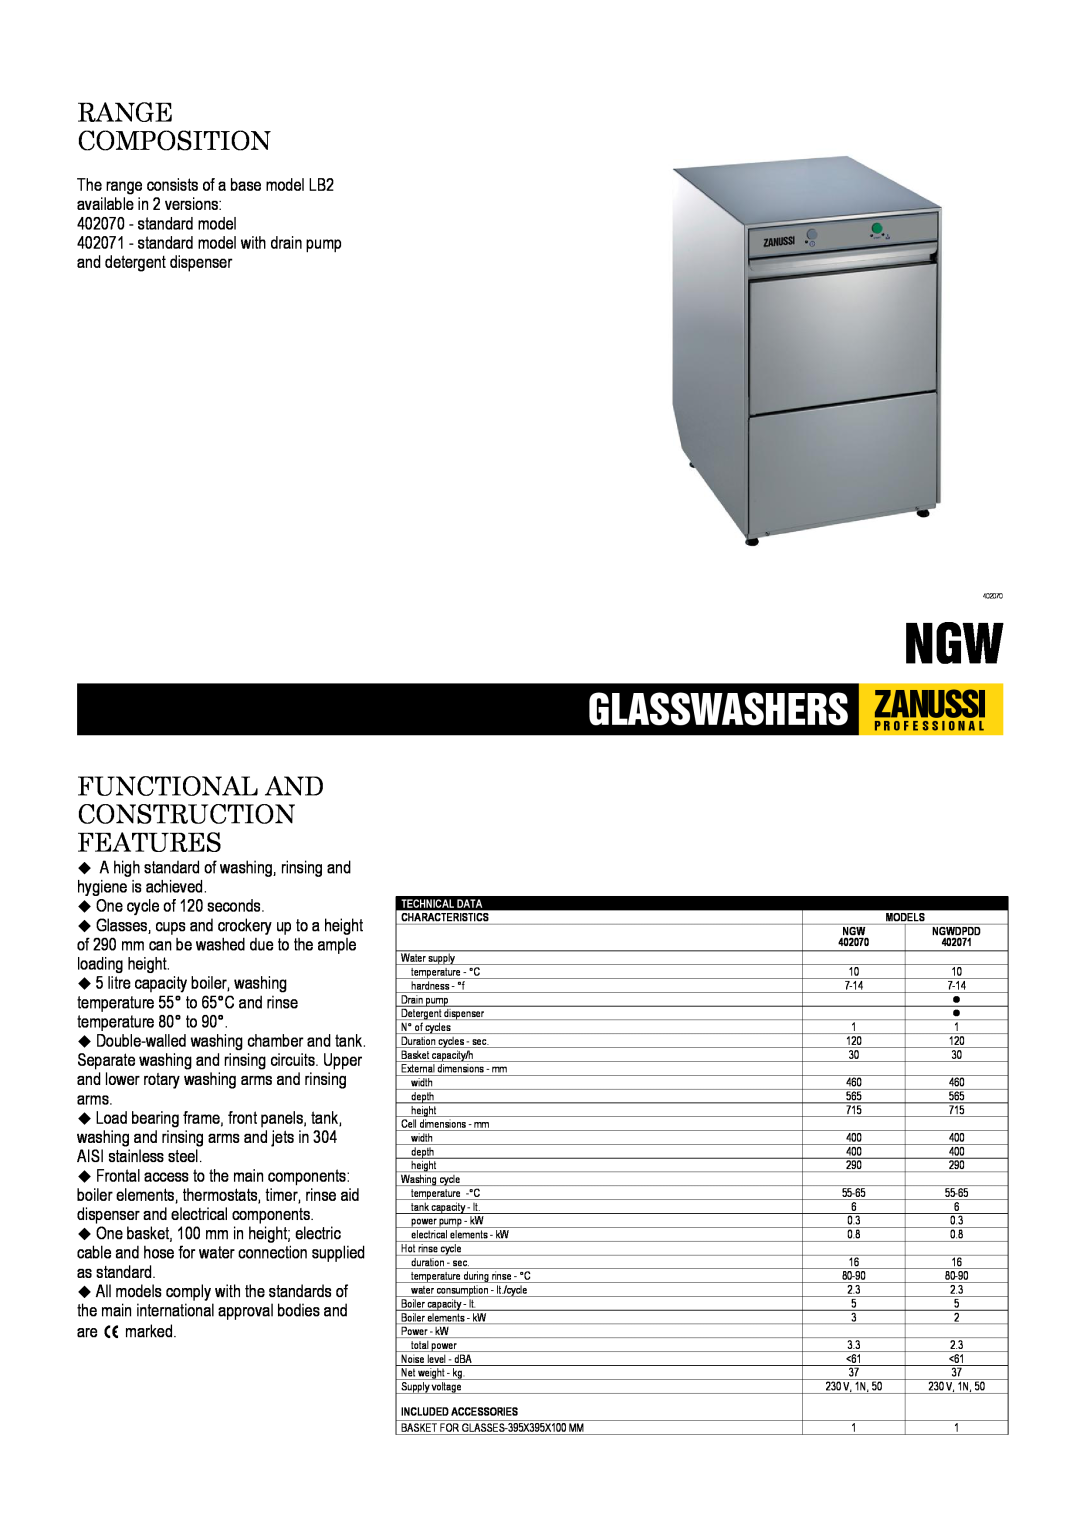 Zanussi NGWDPDD, 402070, 402071 dimensions Range Composition, Functional And Construction Features 